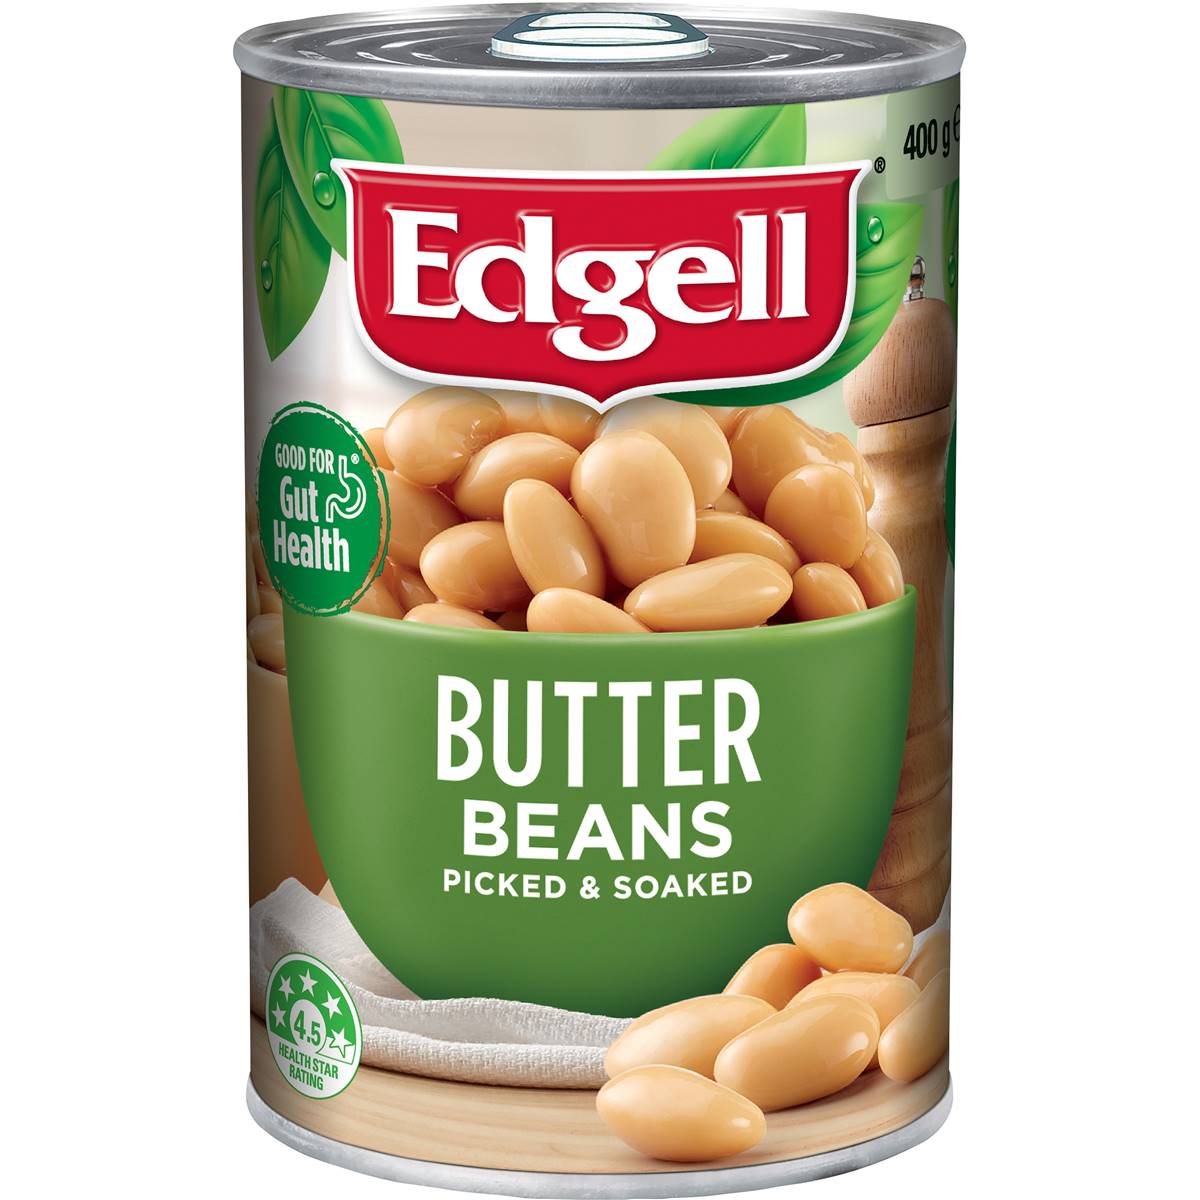 Edgell Canned Butter Beans Picked And Soaked Legumes 400g